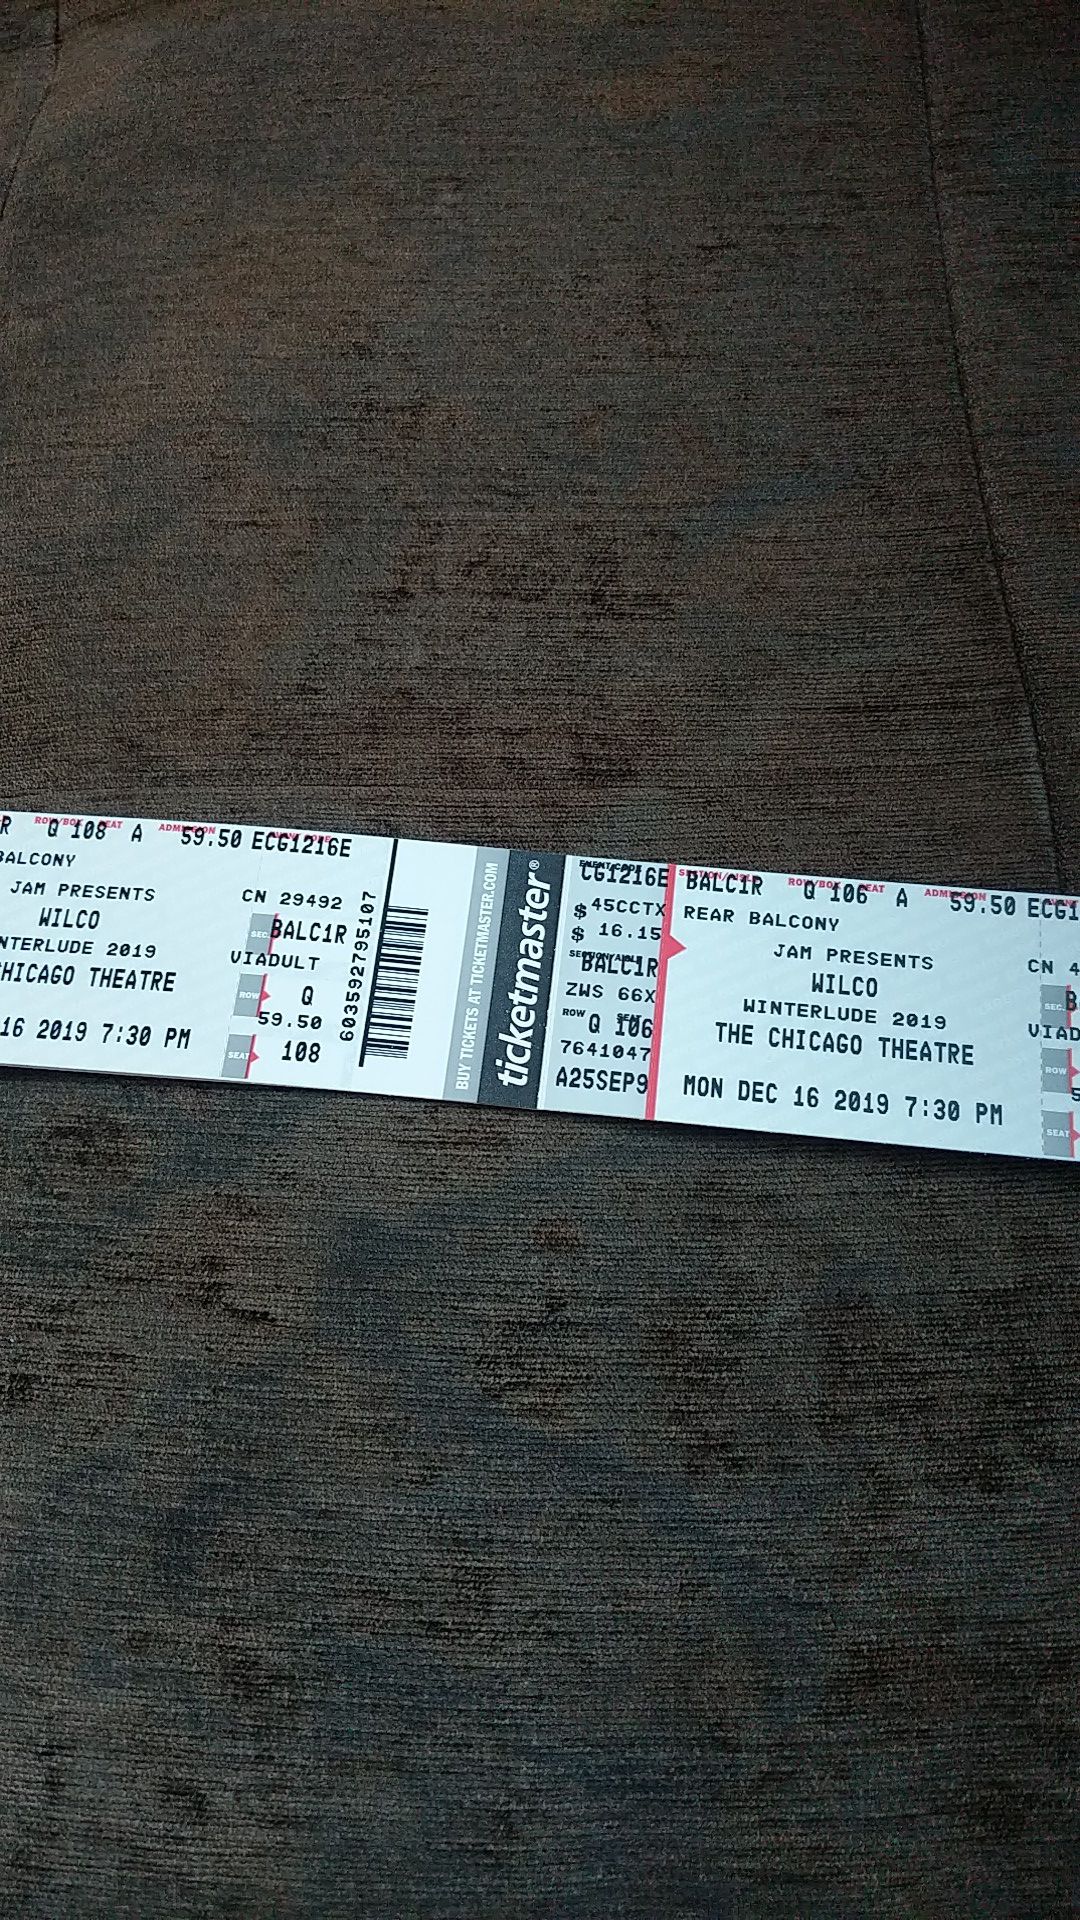 Wilco Tickets for Monday, December 16 @ Chicago Theatre